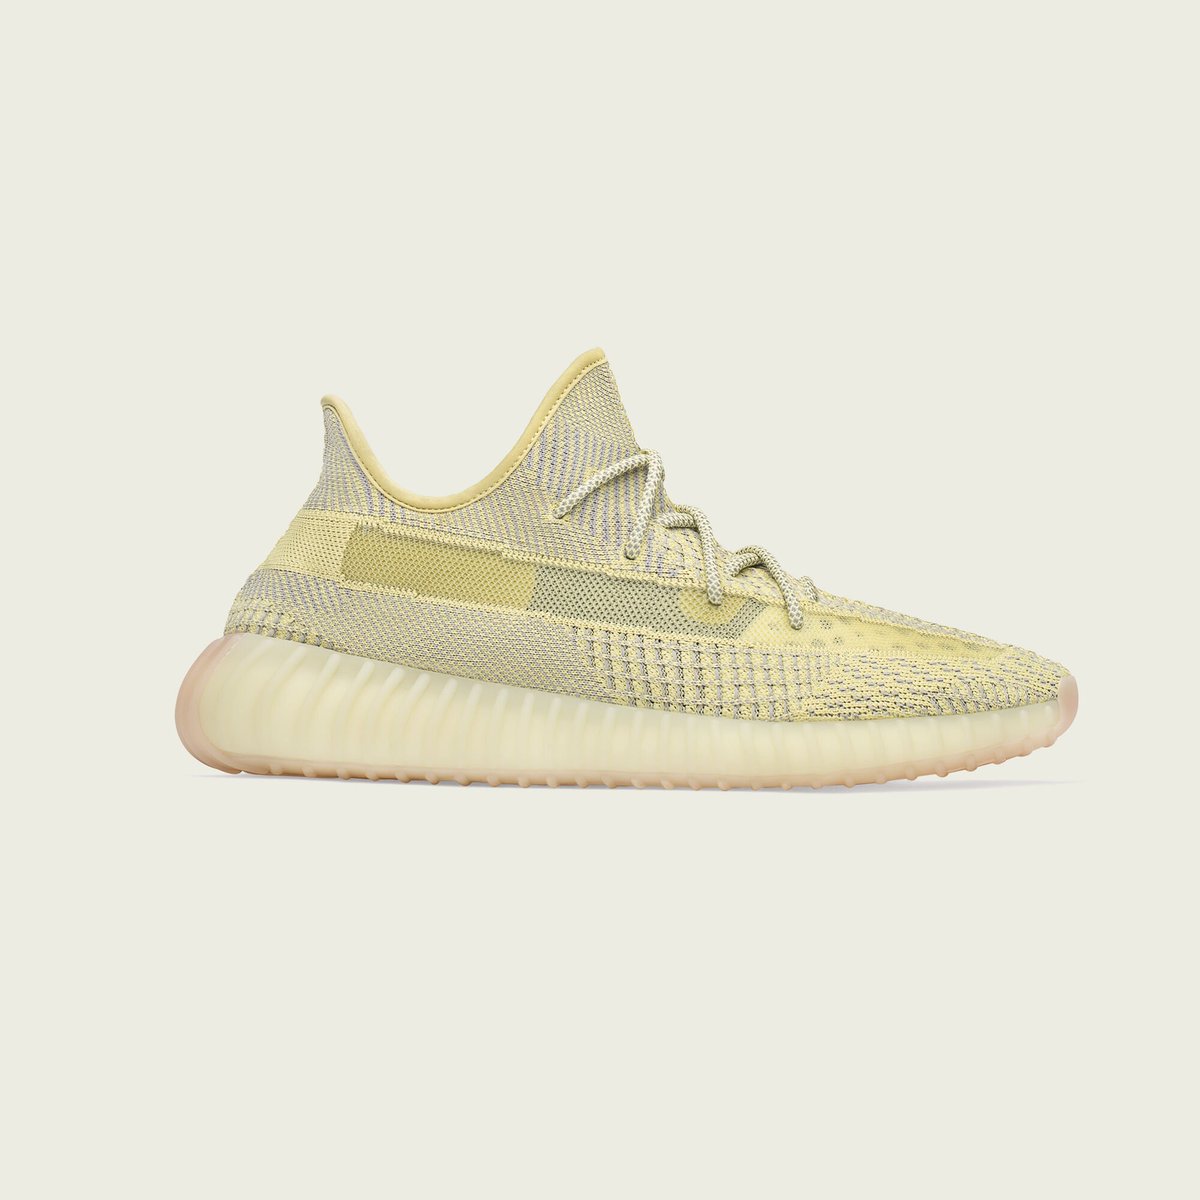 Ad: #YEEZY LAUNCH ENDS at 7:45PM PT 